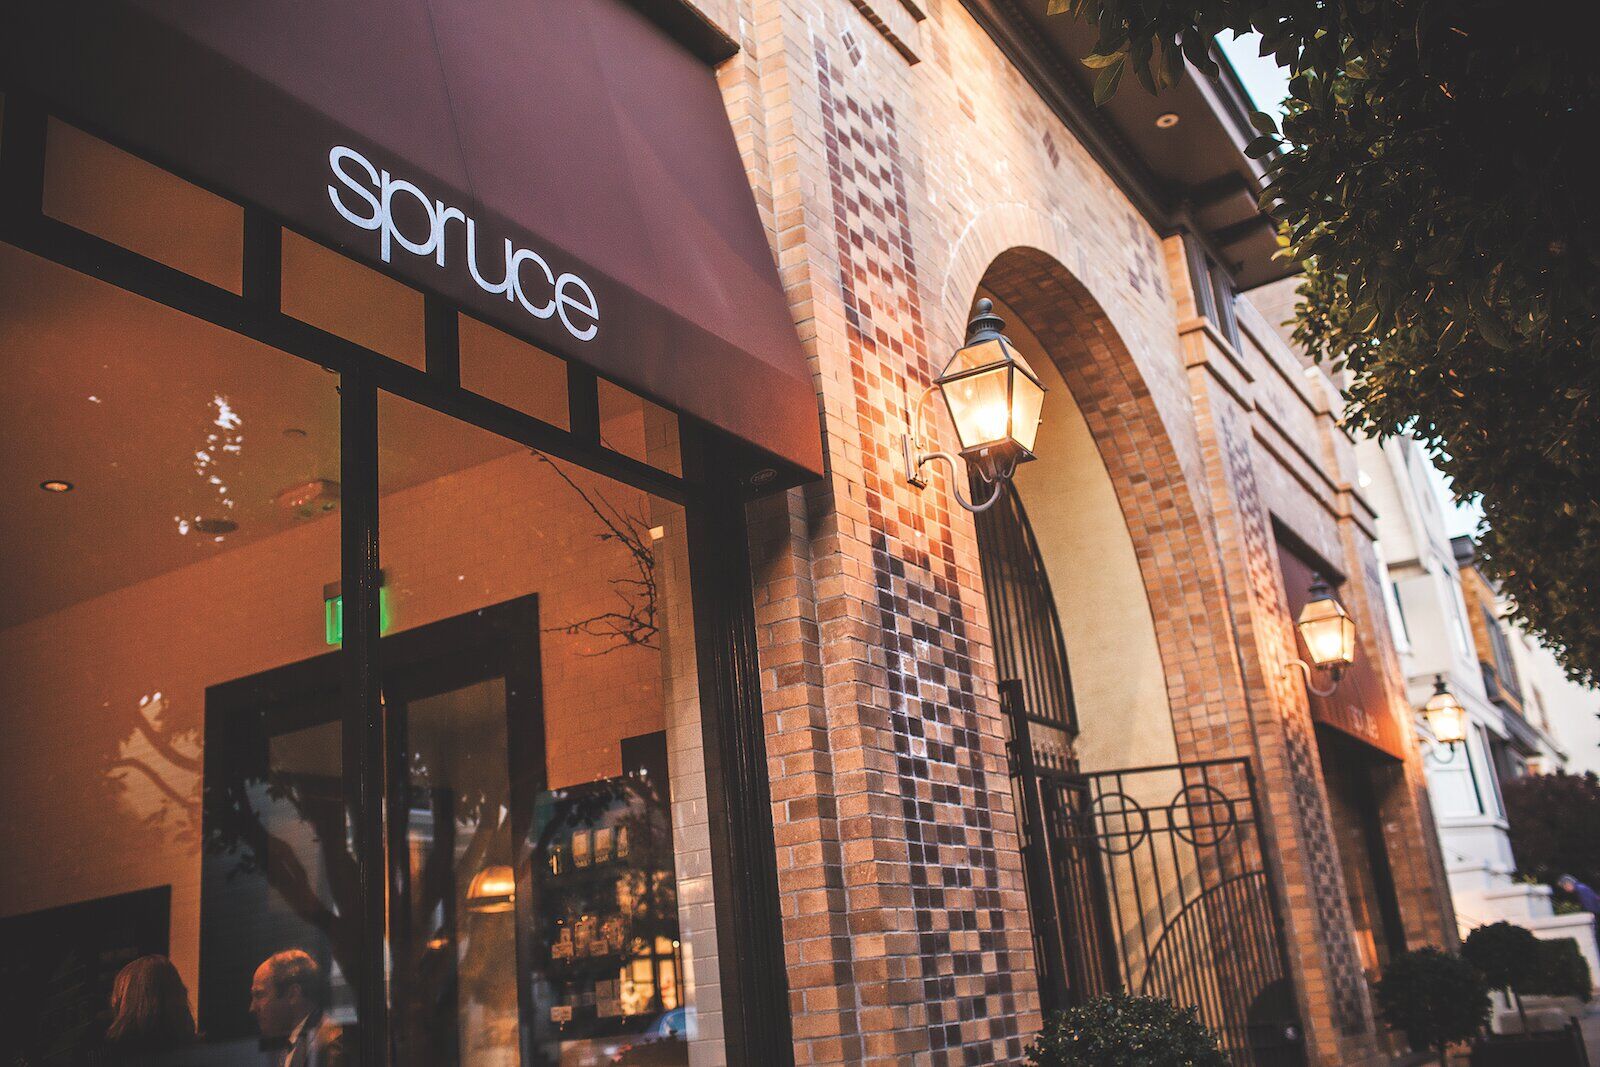 exterior of spruce restaurant with brown awning and brick facade